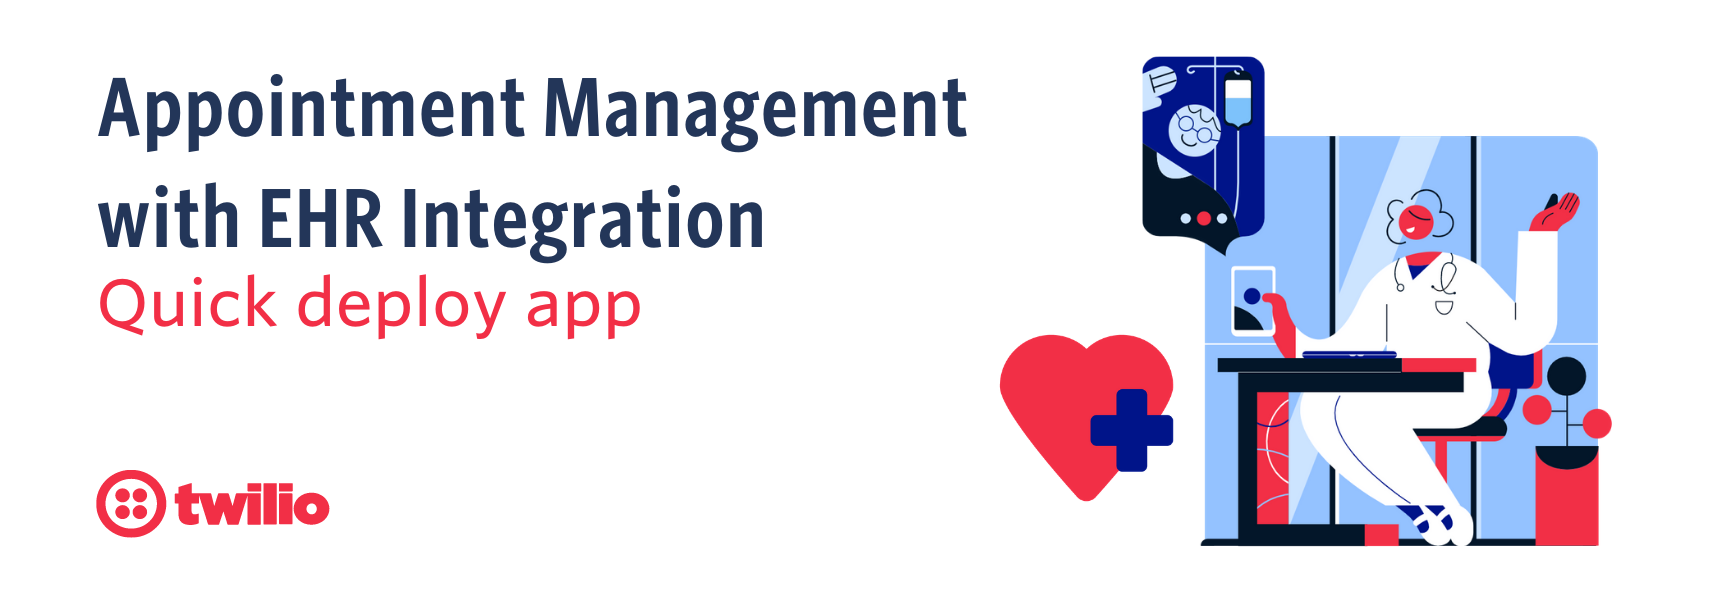 Appointment Management with EHR Integration Quick Deploy App.png